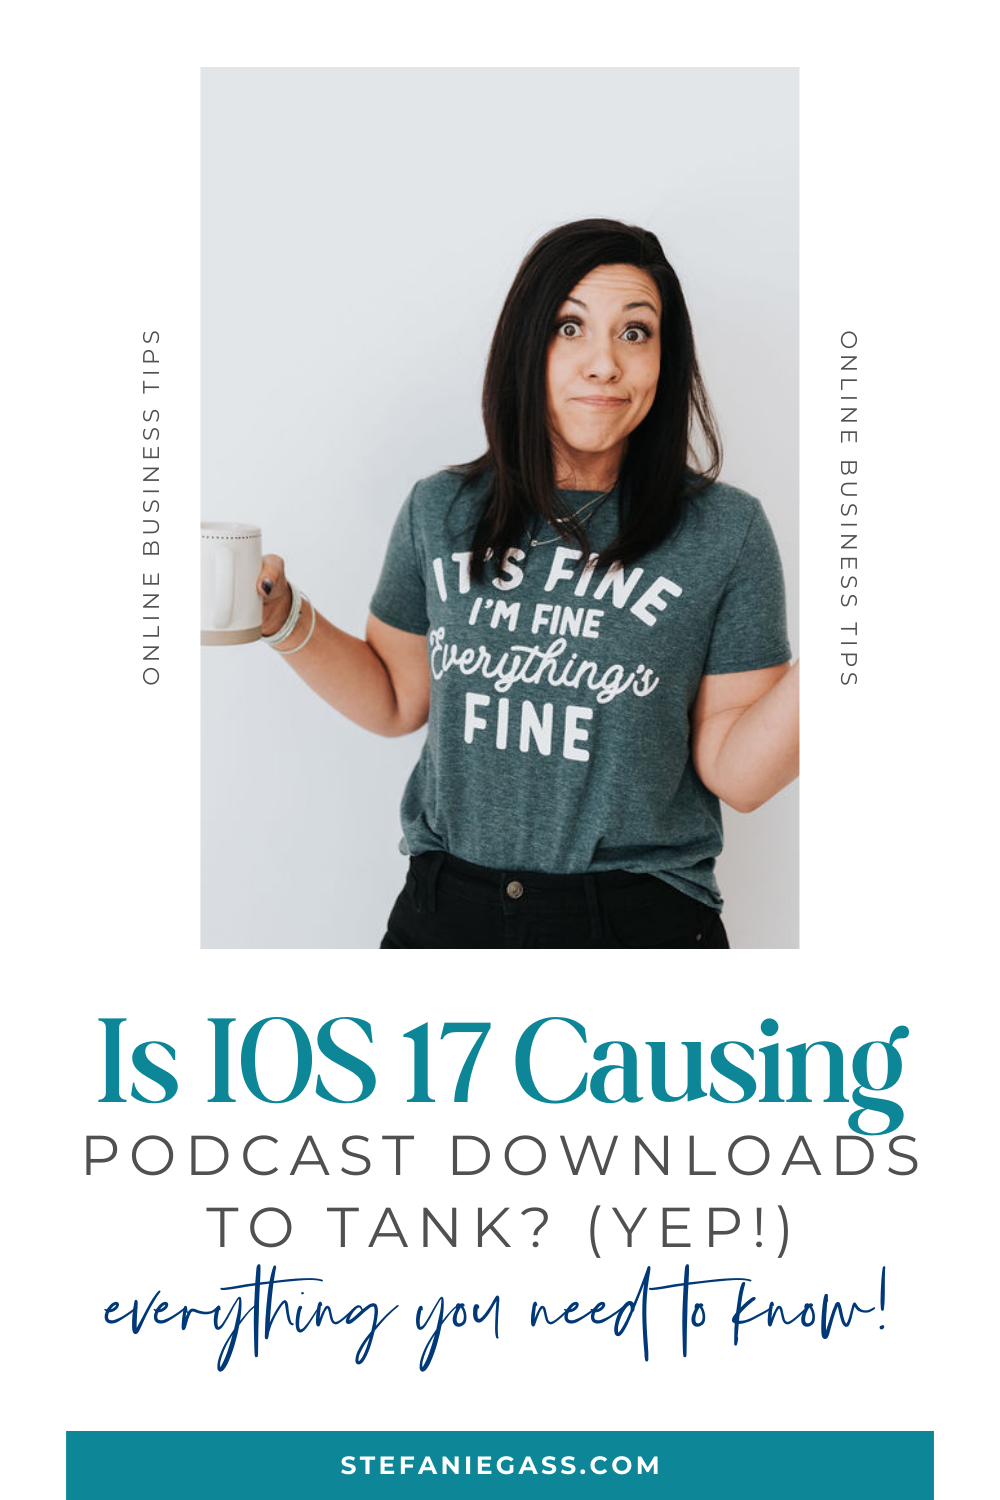 Brown haired woman standing in shock with a coffee mug, wearing a teal t-shirt. Text says: Is iOS 17 Causing Podcast Downloads to Tank? (YEP!) Everything You Need To Know!